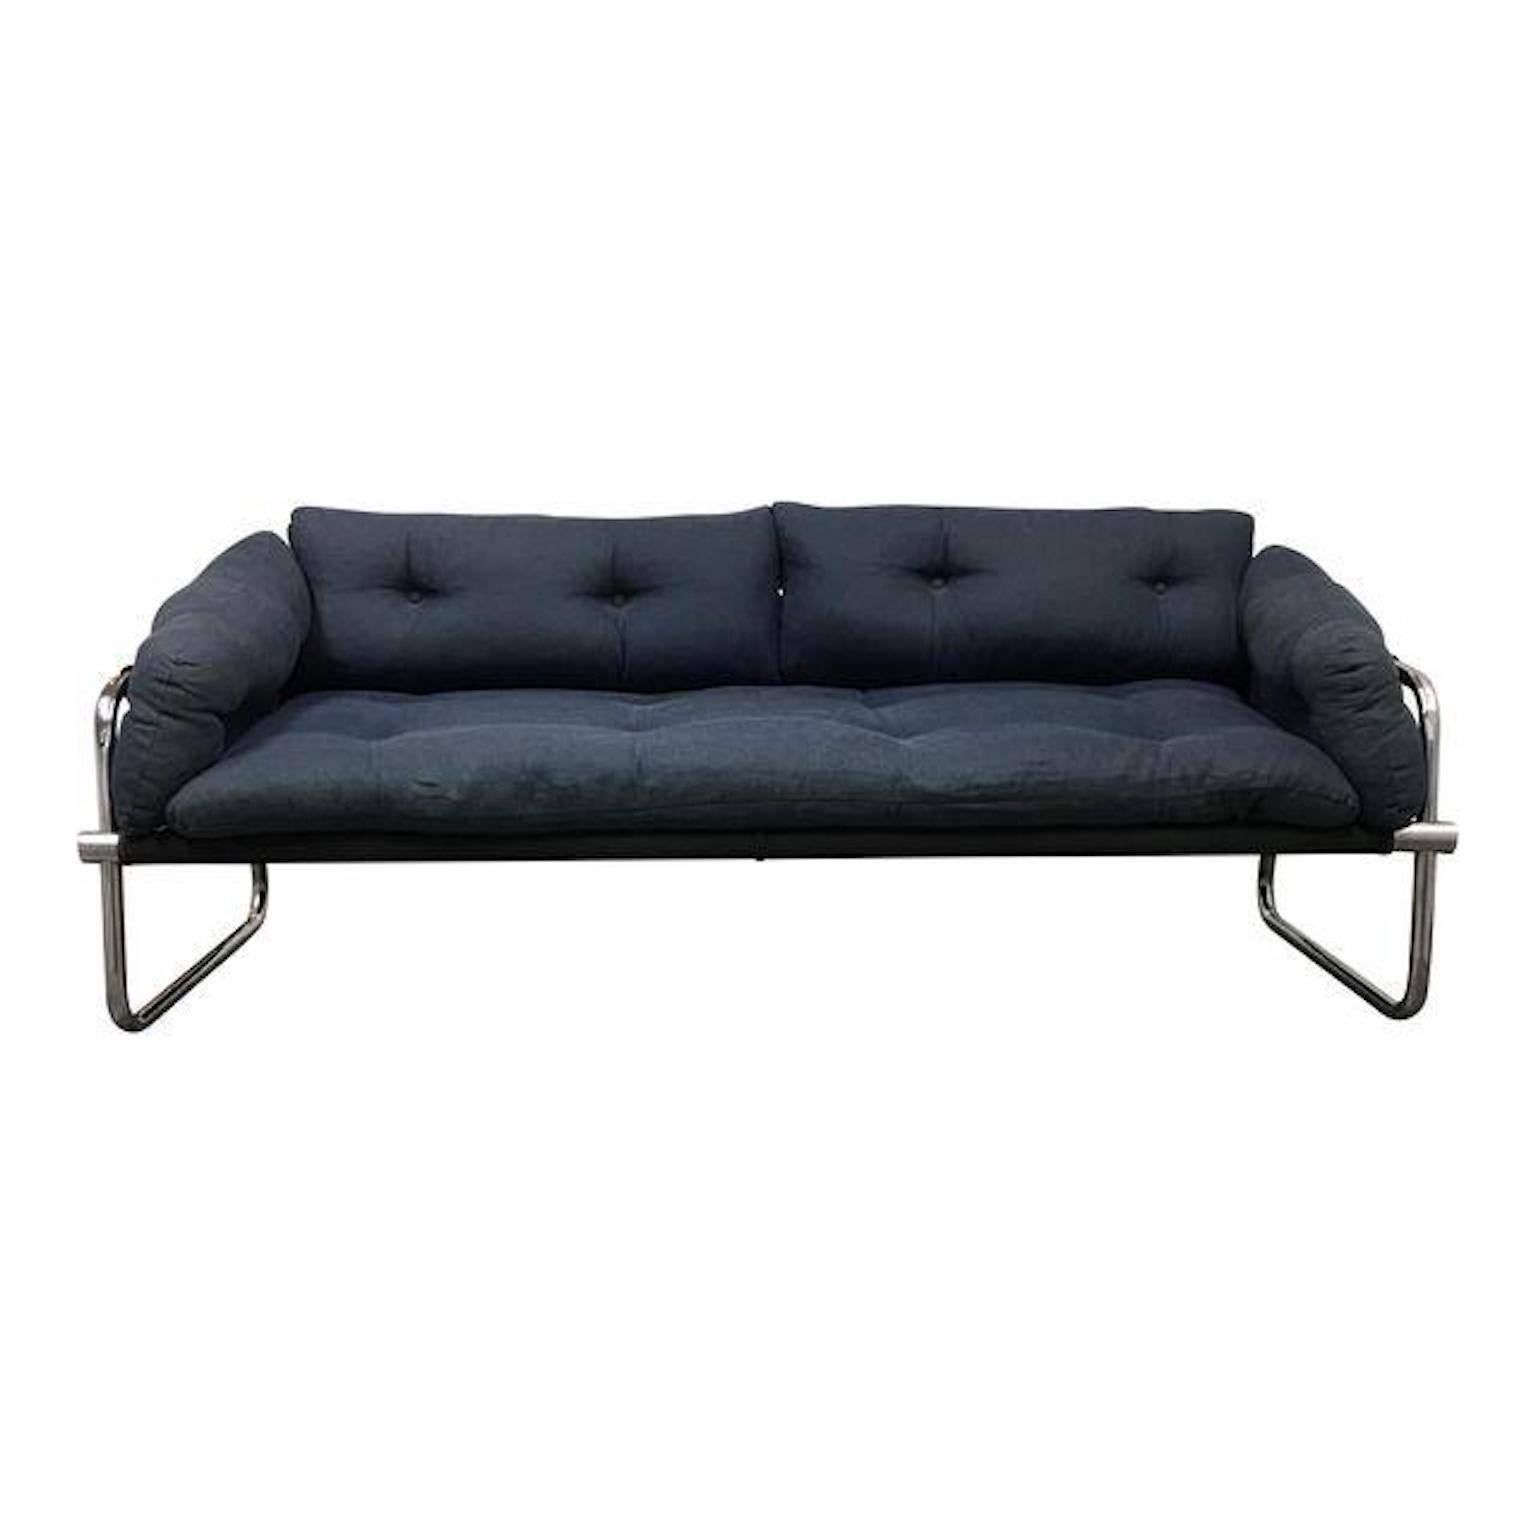 Landes Manufacturing Company Sling Sofa by Jerry Johnson